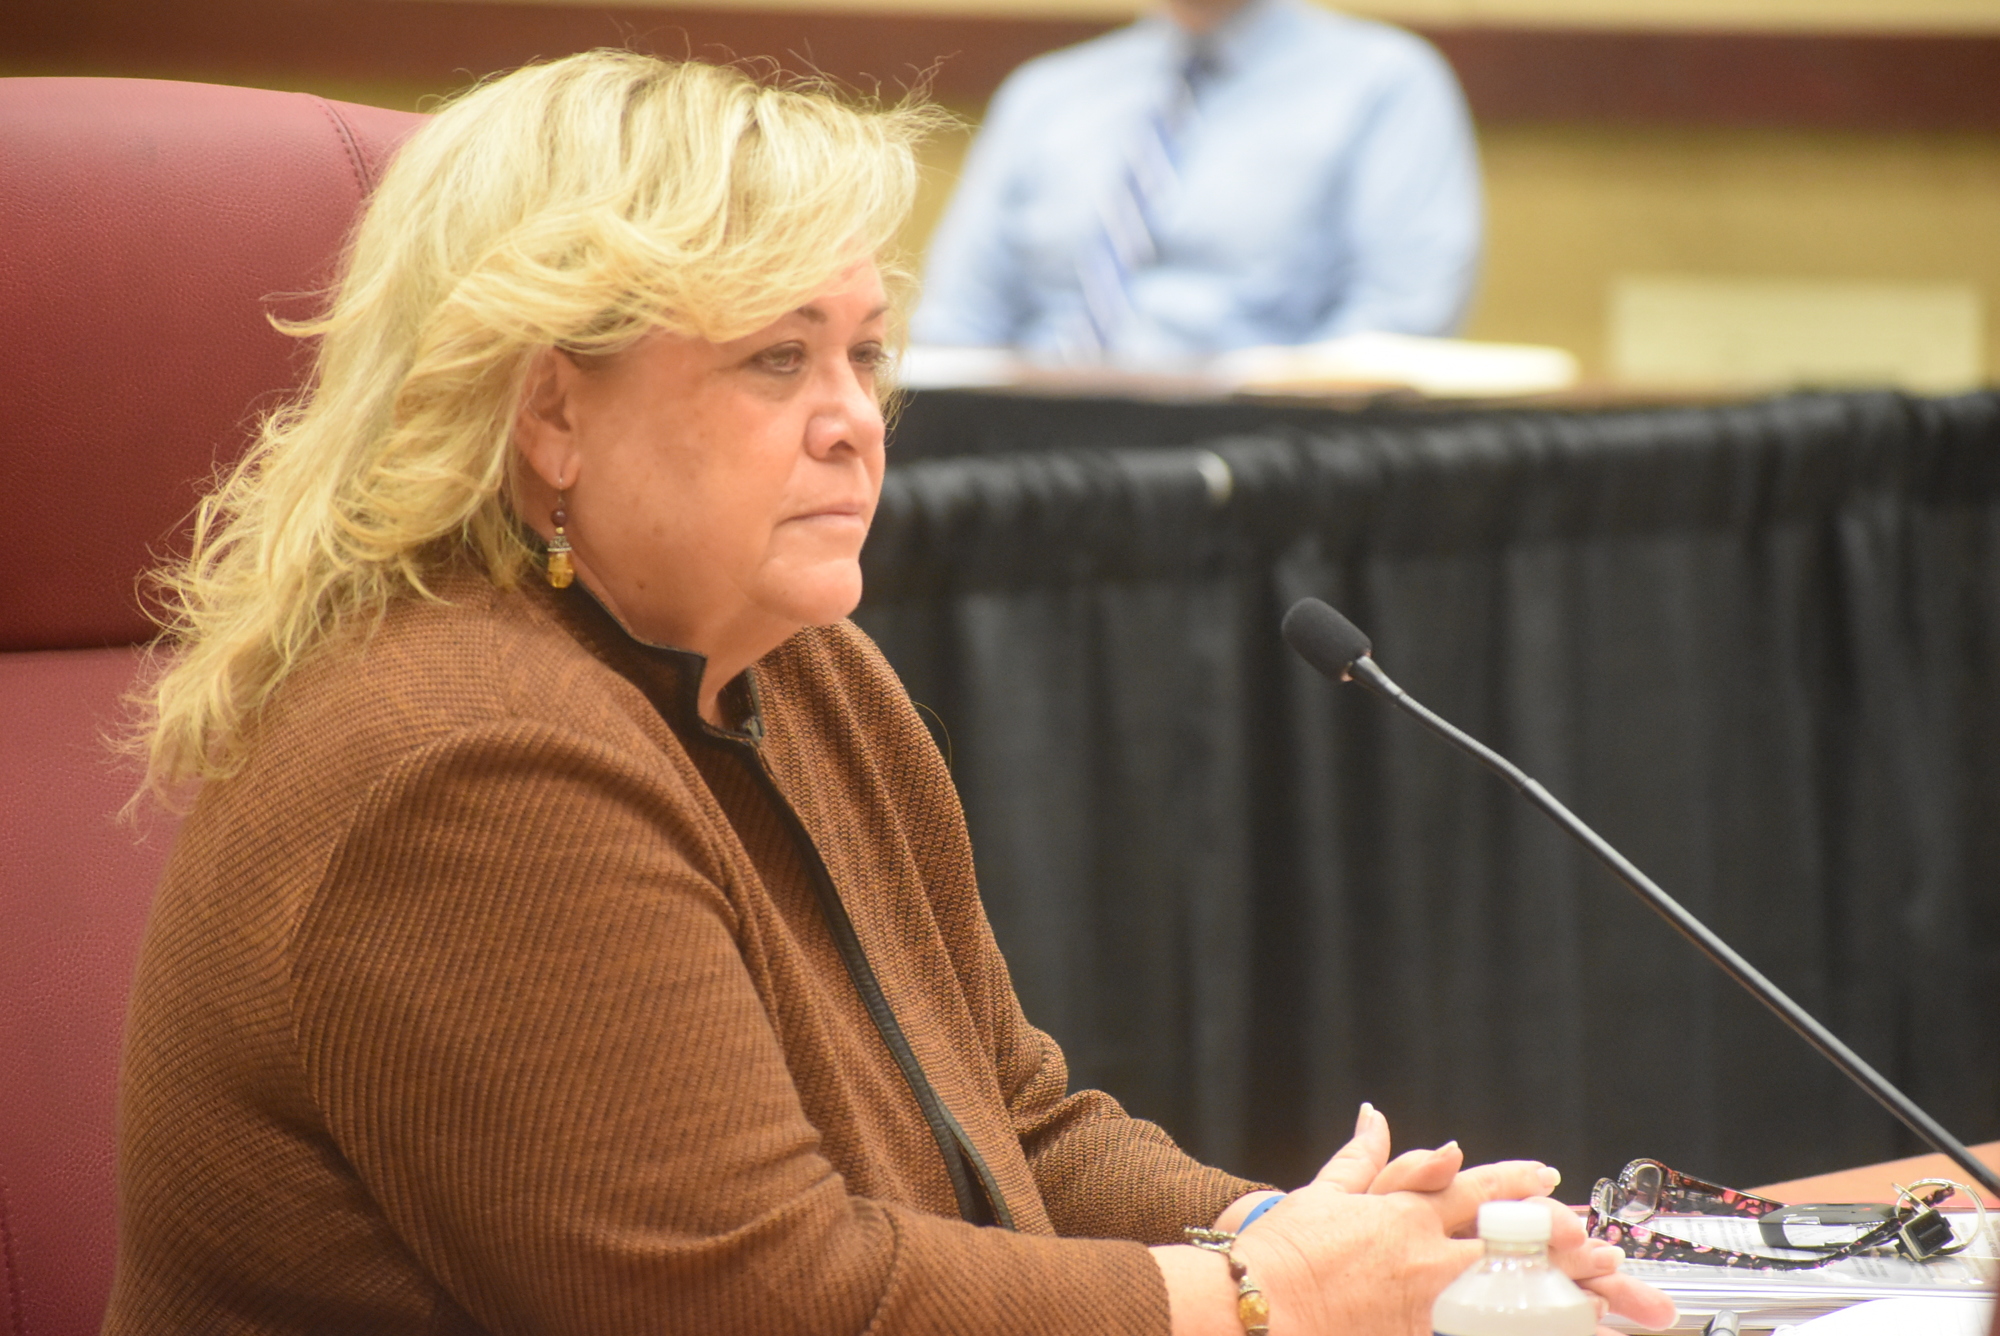 Manatee County administrator Cheri Coryea has been given only a couple months to work with the new commission.